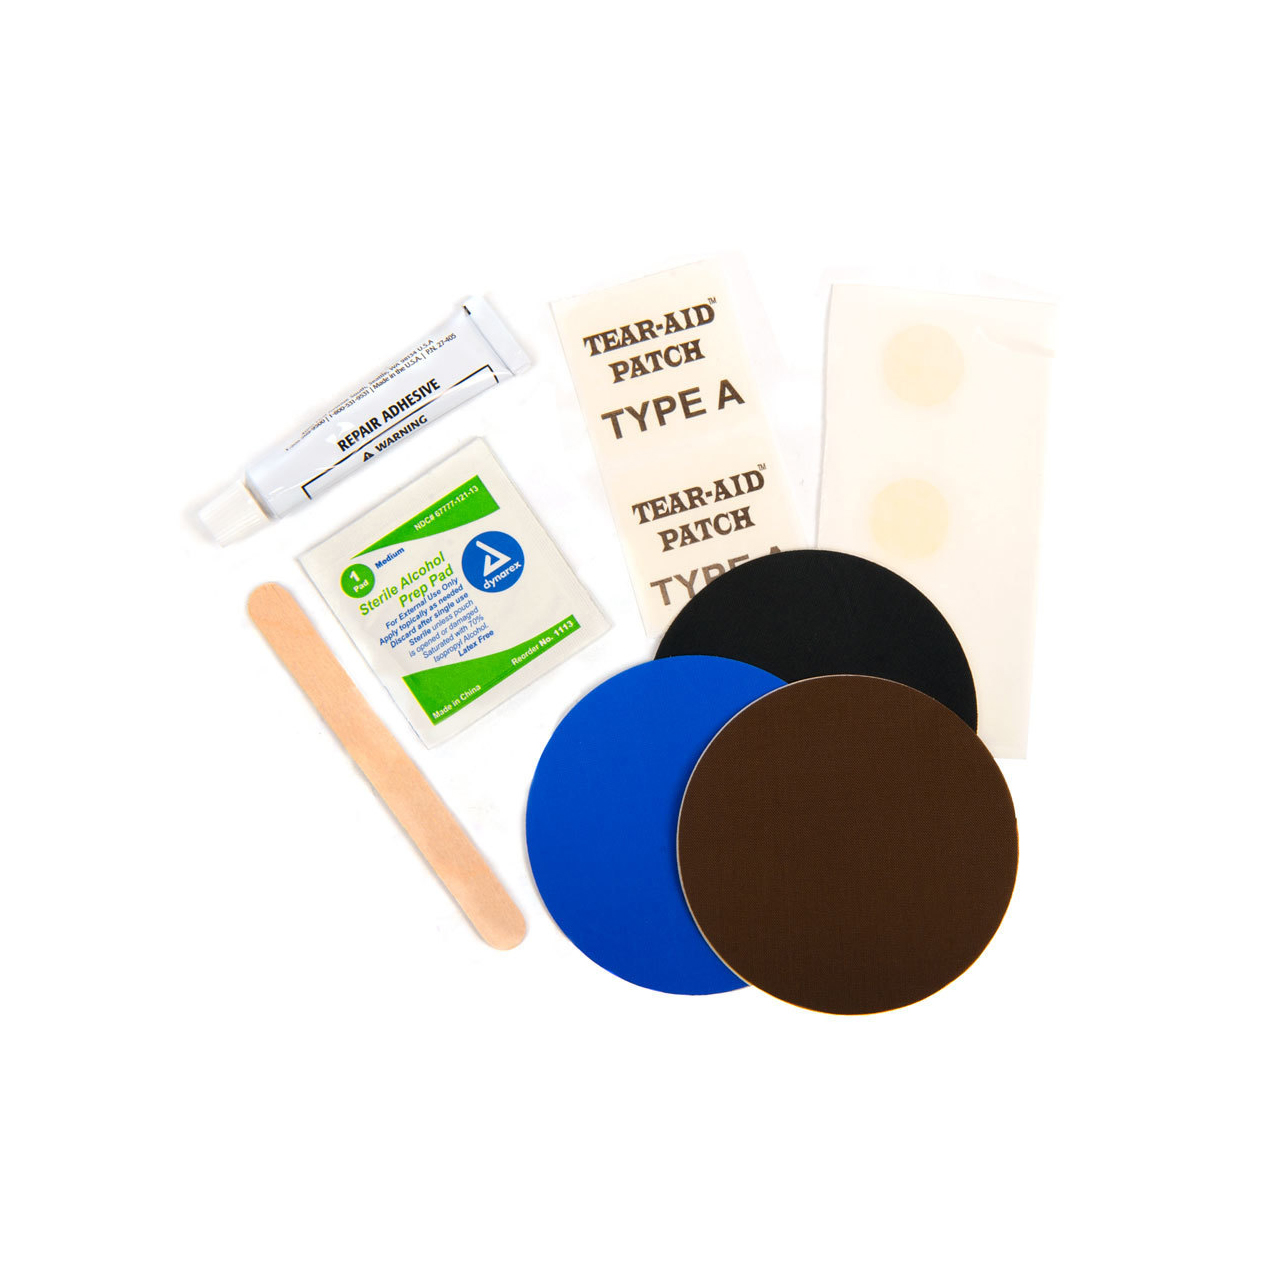 Therm-a-Rest Permanent Home Repair Kit